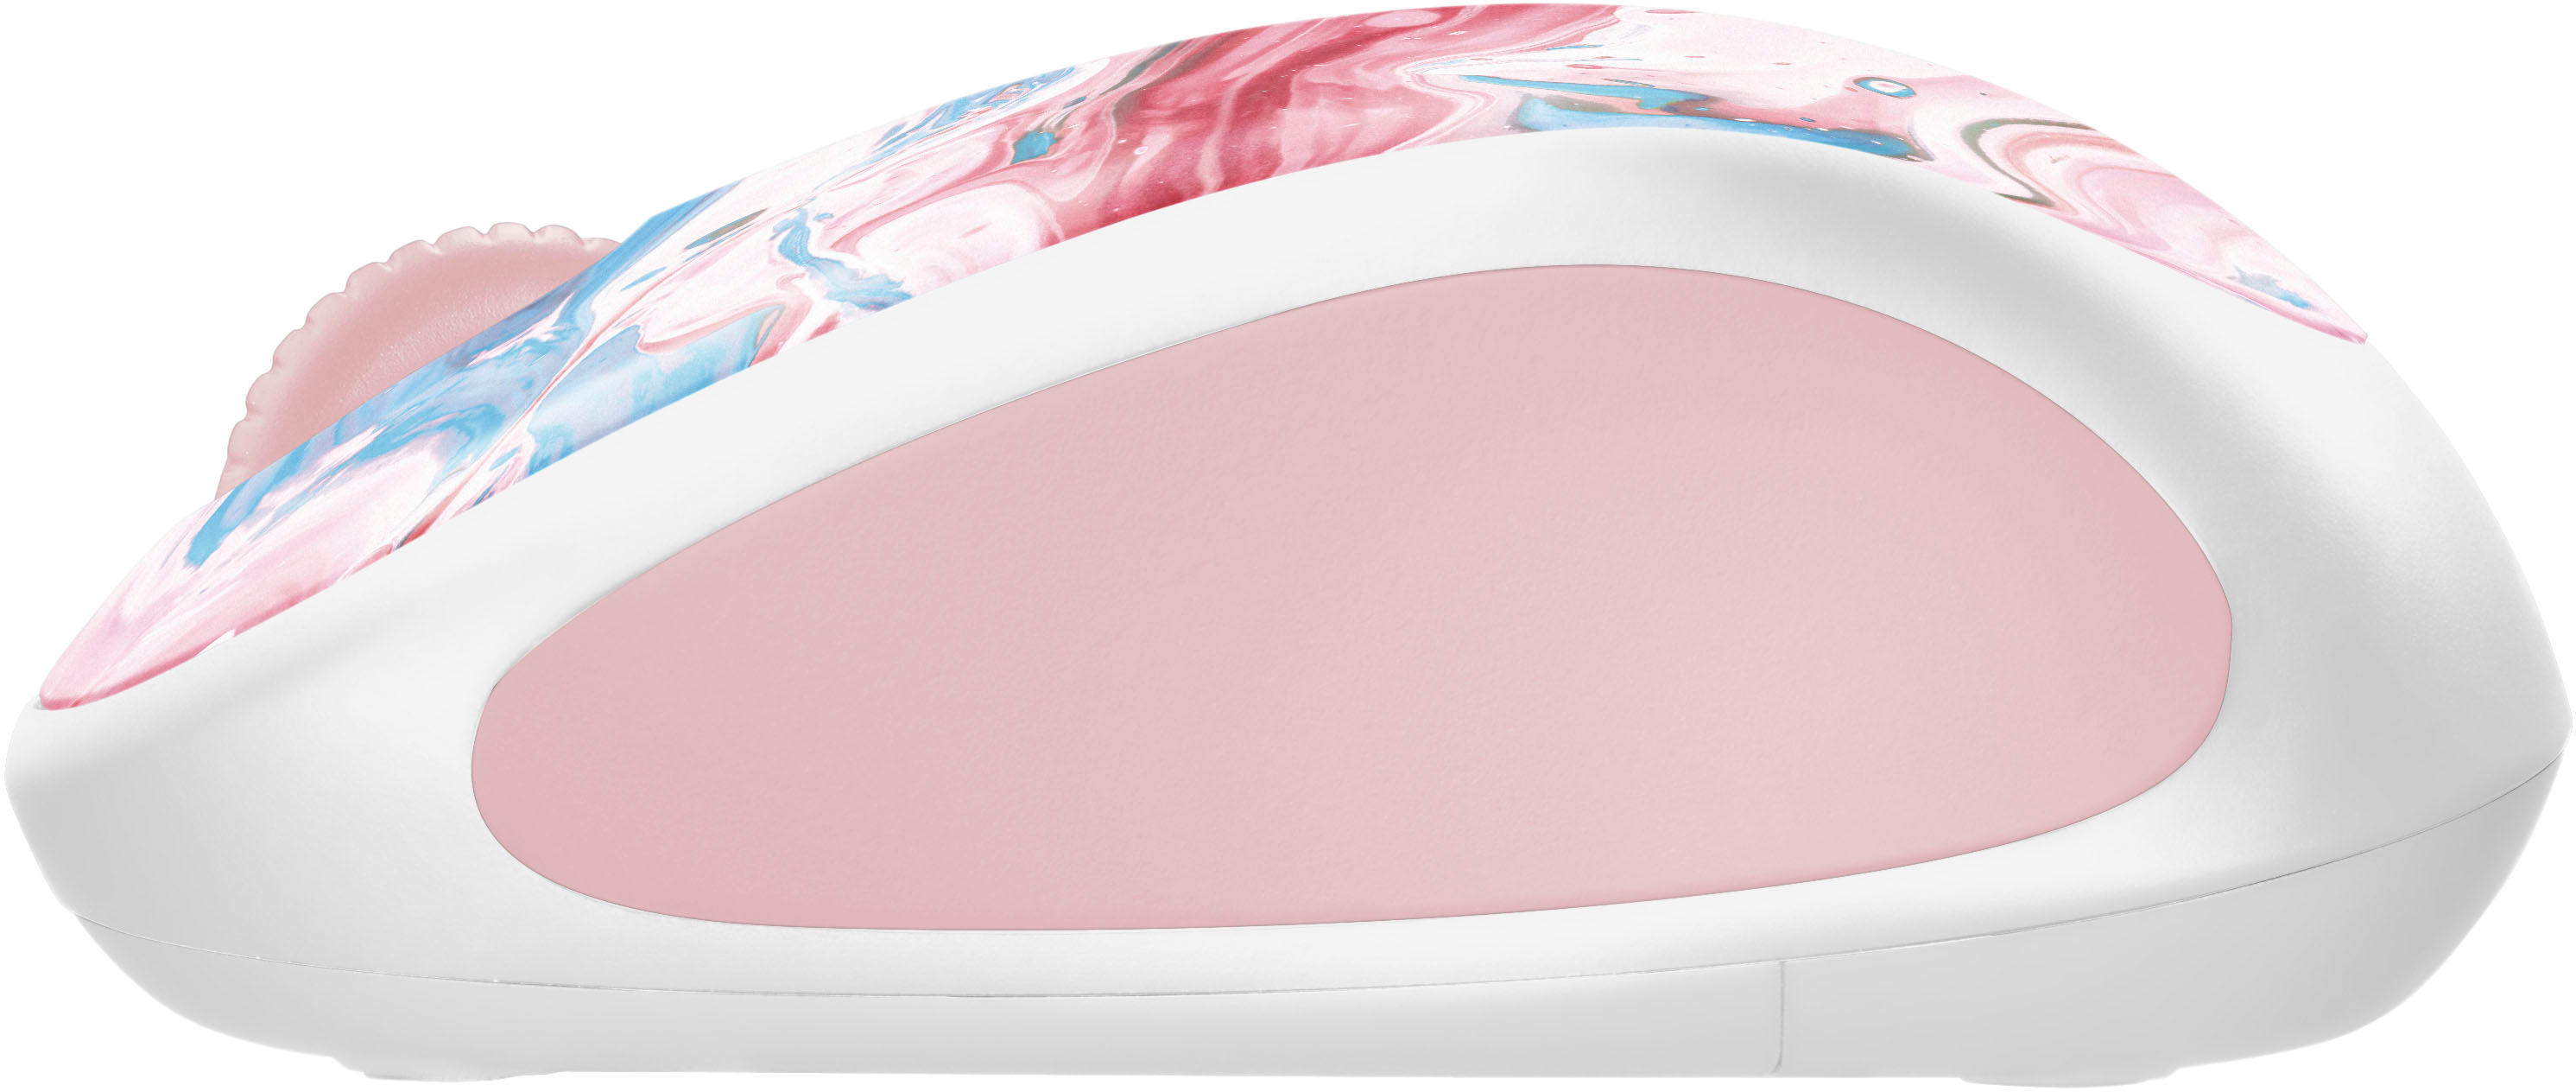 Logitech Design Collection Wireless Mouse – Cotton Candy